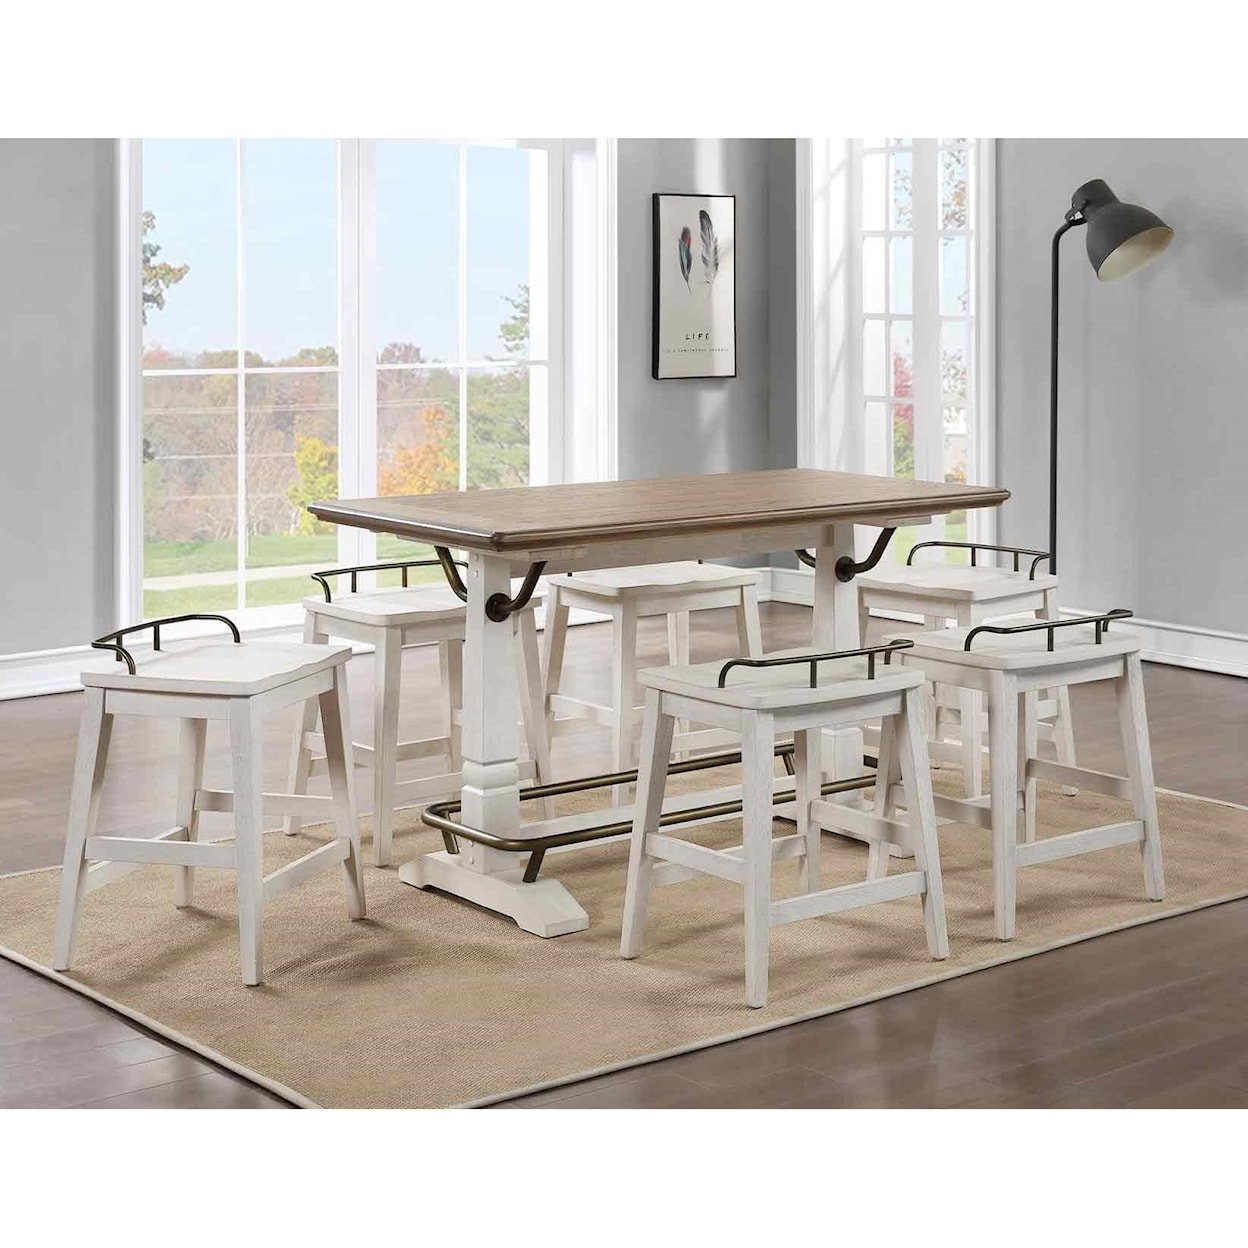 Steve Silver Pendleton Counter Height Table and Stool Set